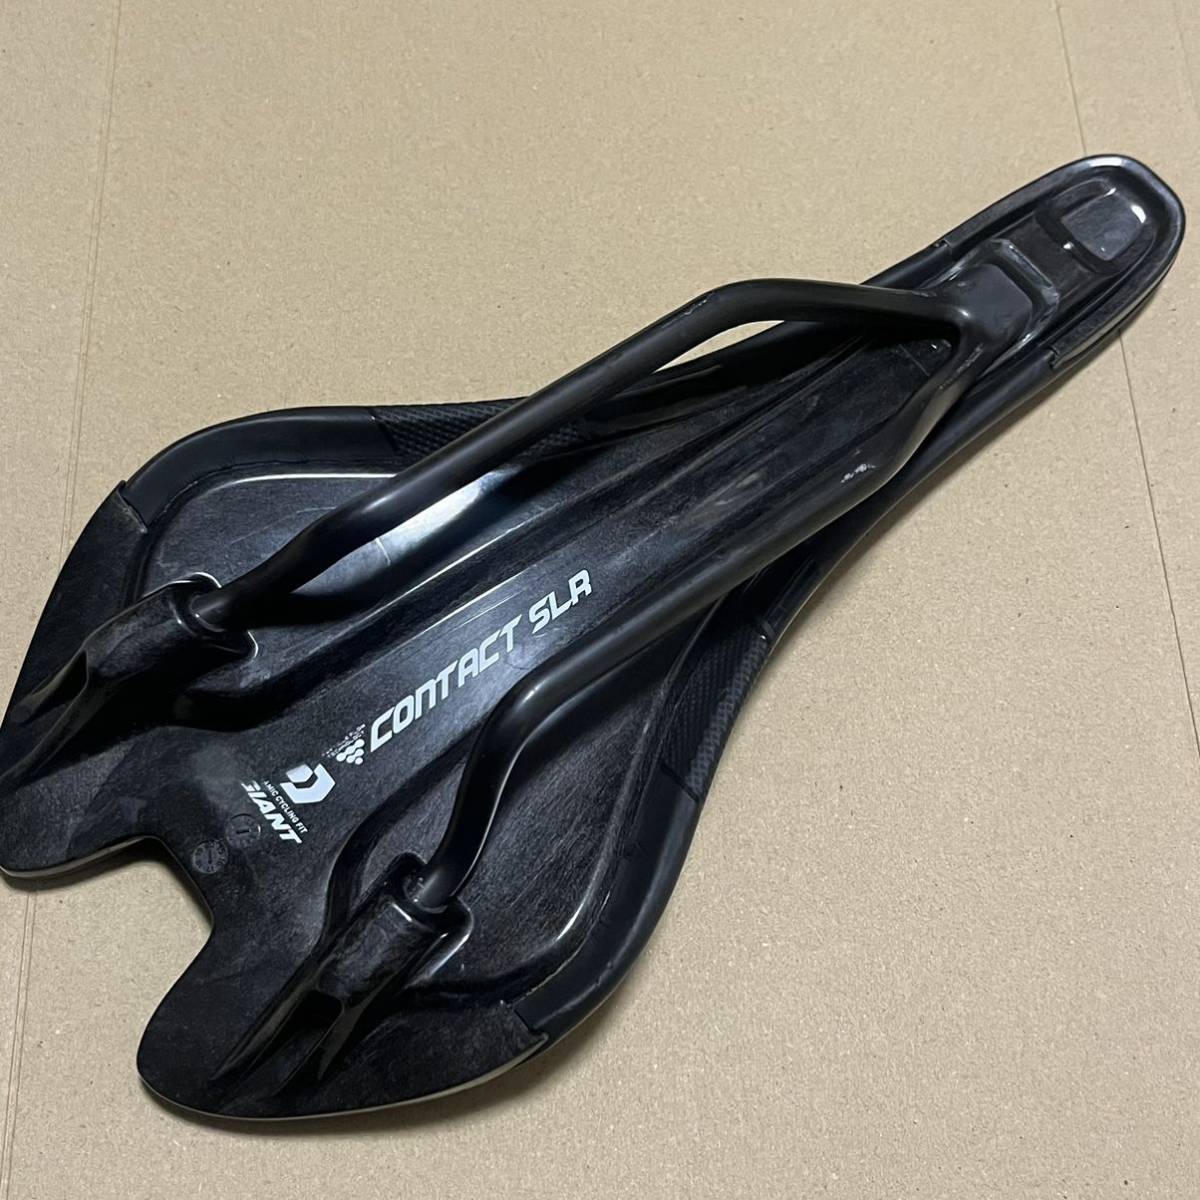 GIANT giant contact slr forward carbon saddle カーボンレール サドル_画像8